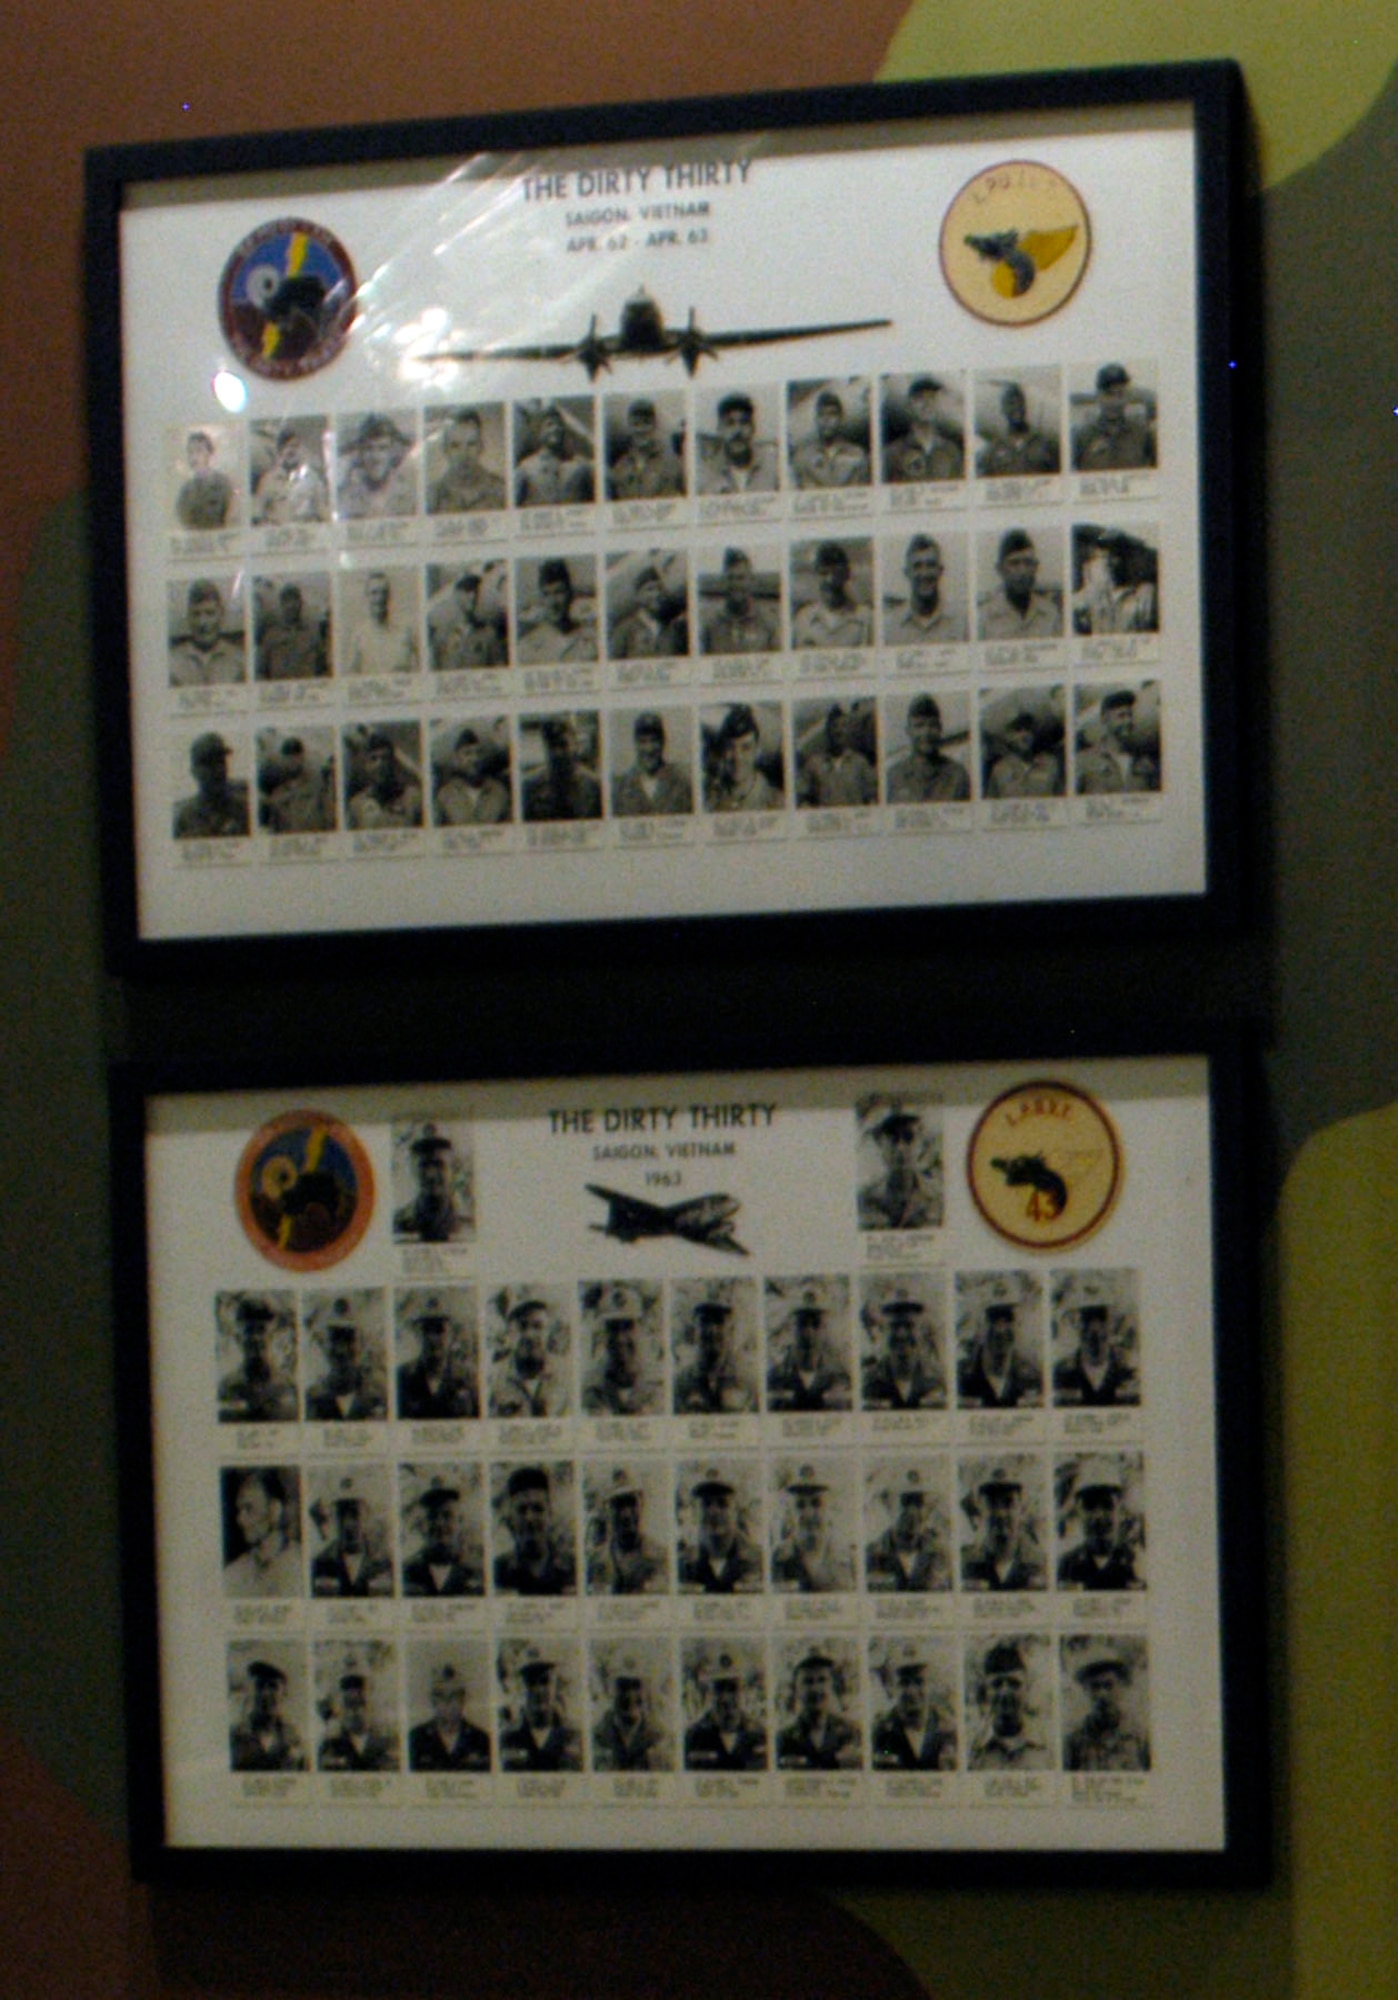 DAYTON, Ohio - Composite photos of members of the "Dirty Thirty" groups on display in the Southeast Asia War Gallery at the National Museum of the U.S. Air Force. (U.S. Air Force photo)